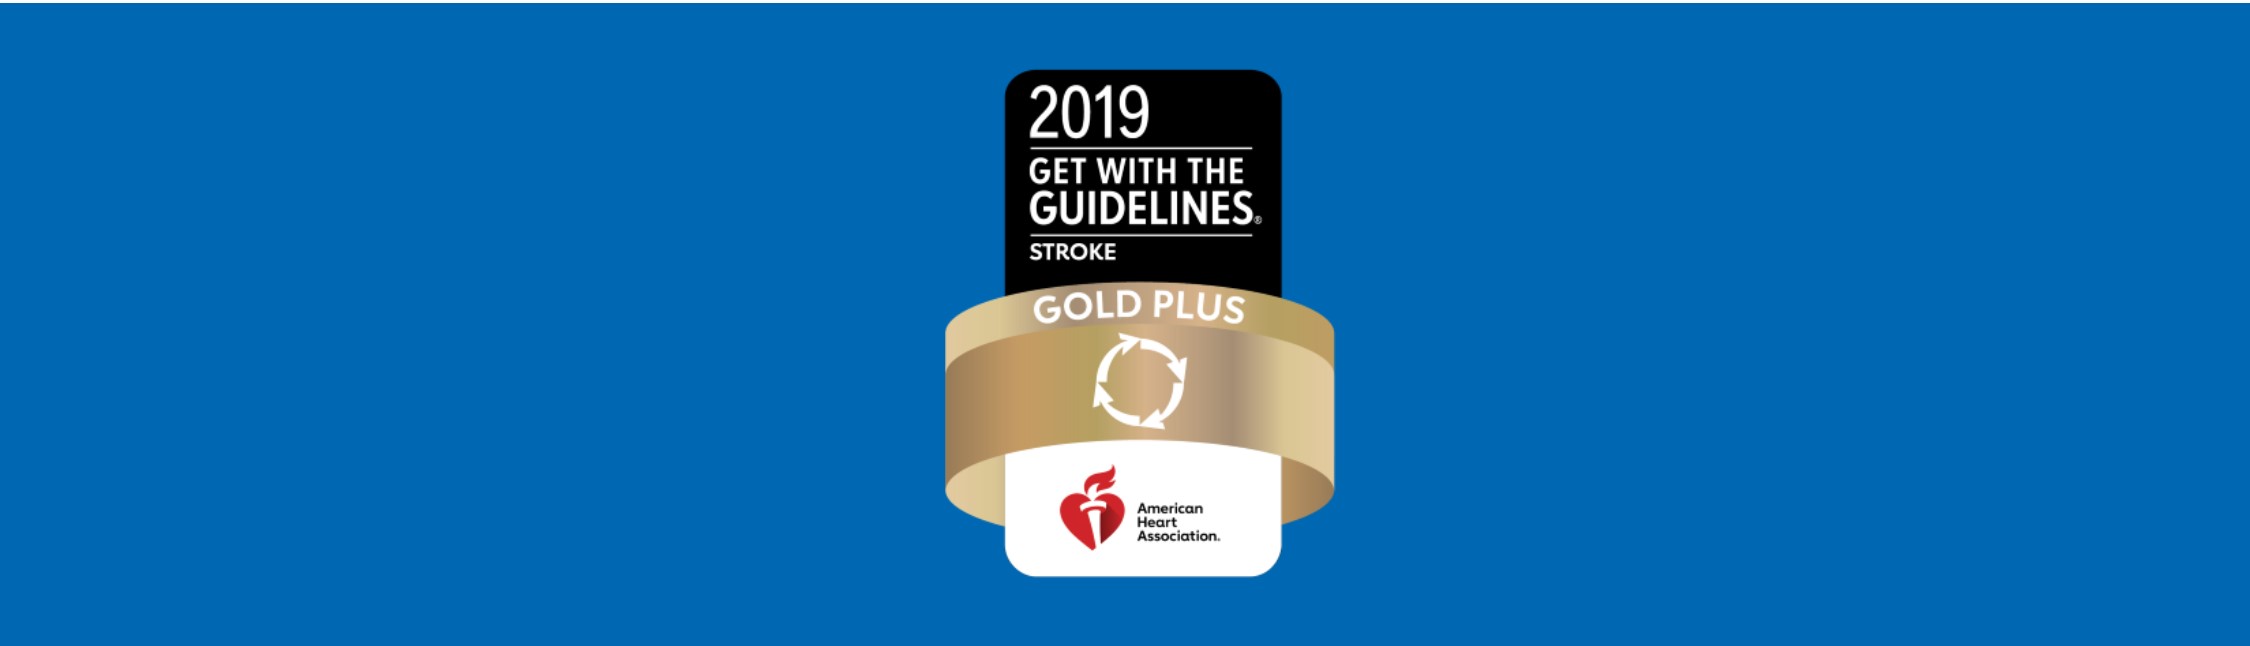 Get With The Guideline-Stroke Gold Plus Quality Achievement Award